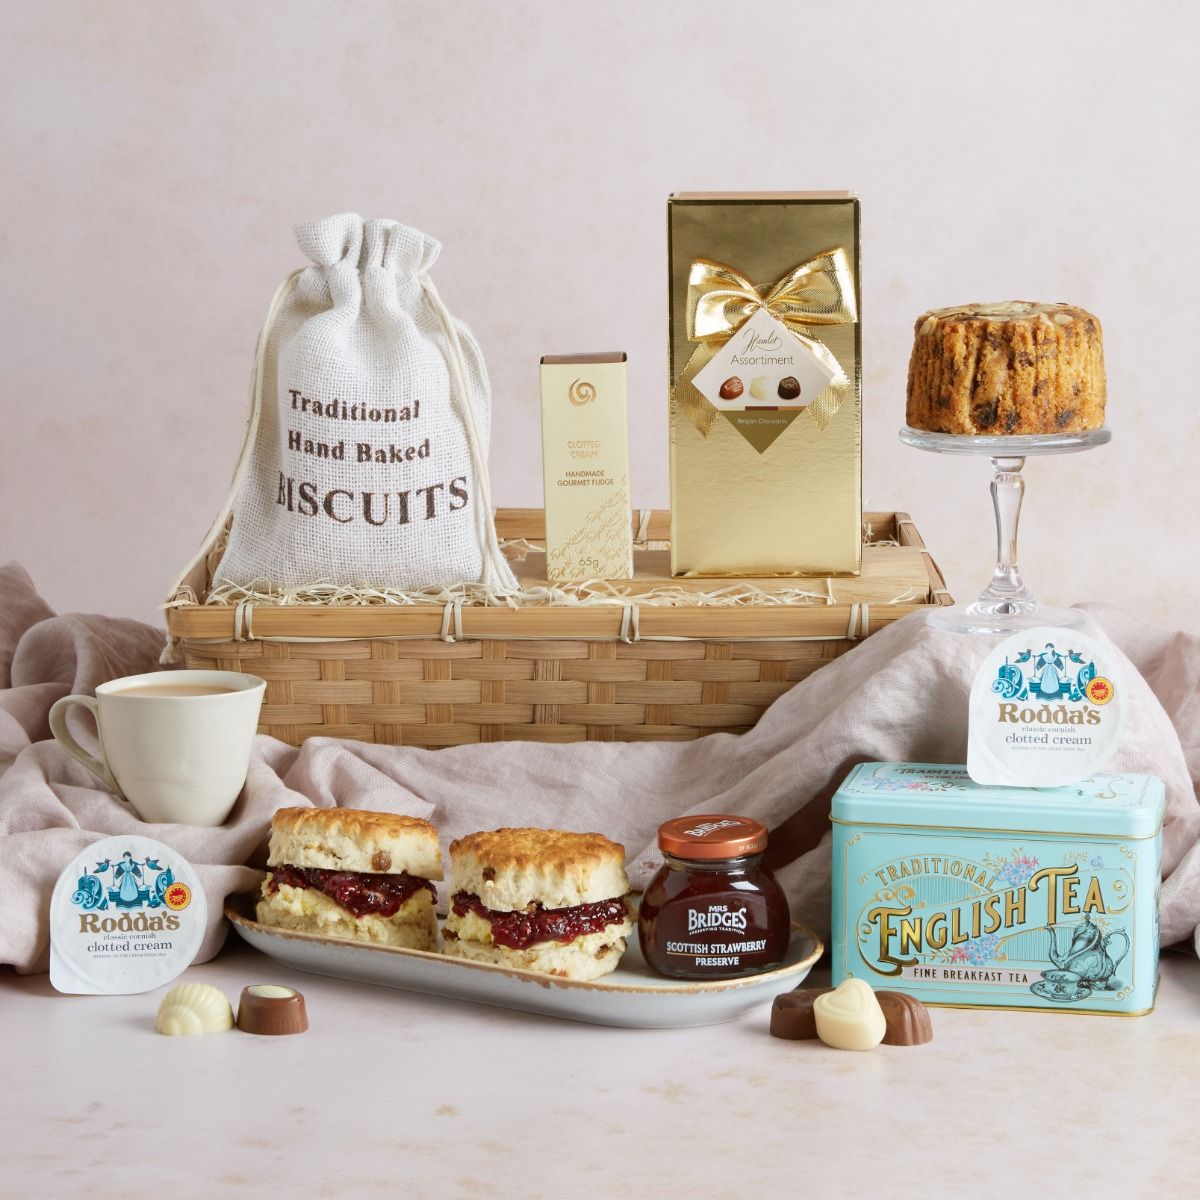 Luxury Cream Tea Gift Hamper with contents on display with fresh scones, jam and clotted cream